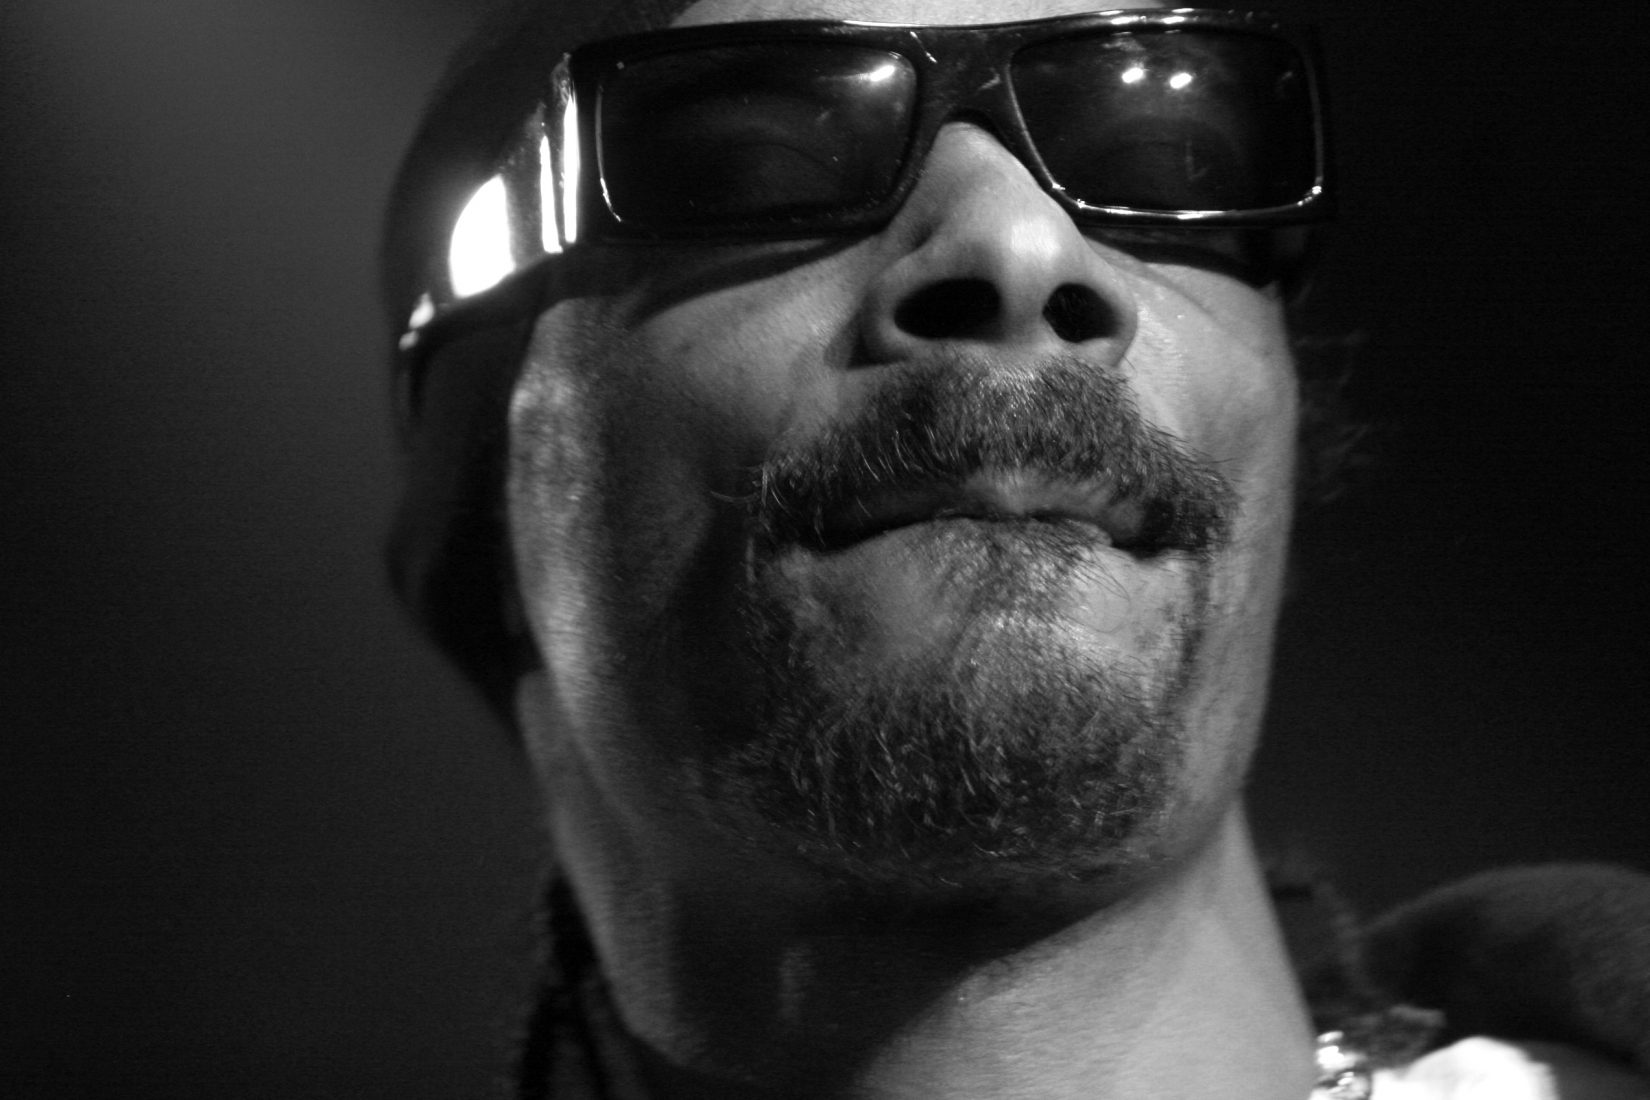 Snoop Dogg is ready for his big 4/20 bash at Red Rocks this spring. (Photo by Mike McGrath, Reverb)